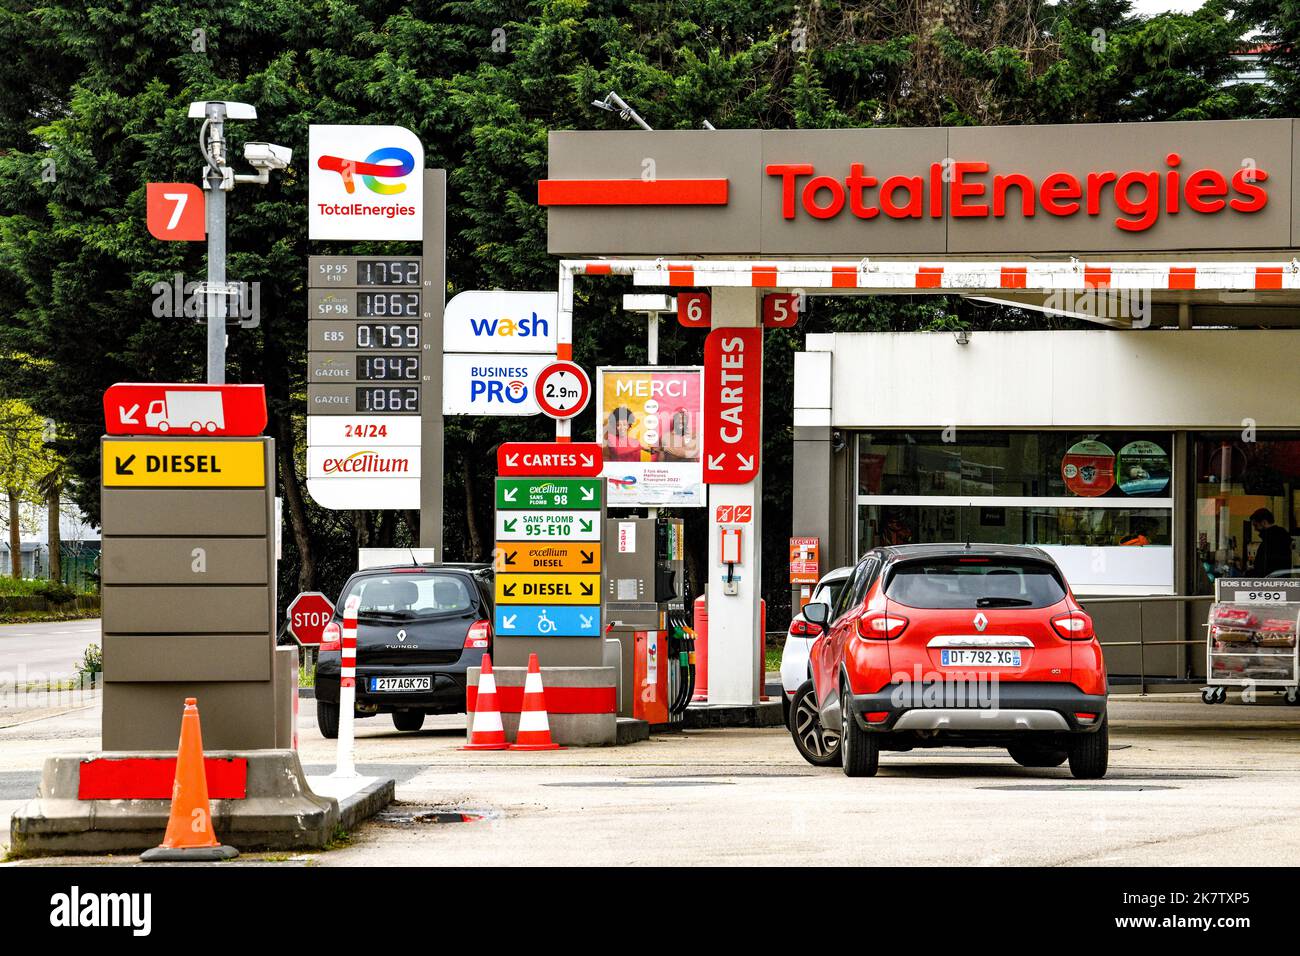 Rise in price of petrol: Total Energies gas station in Rouen (northern France) Stock Photo